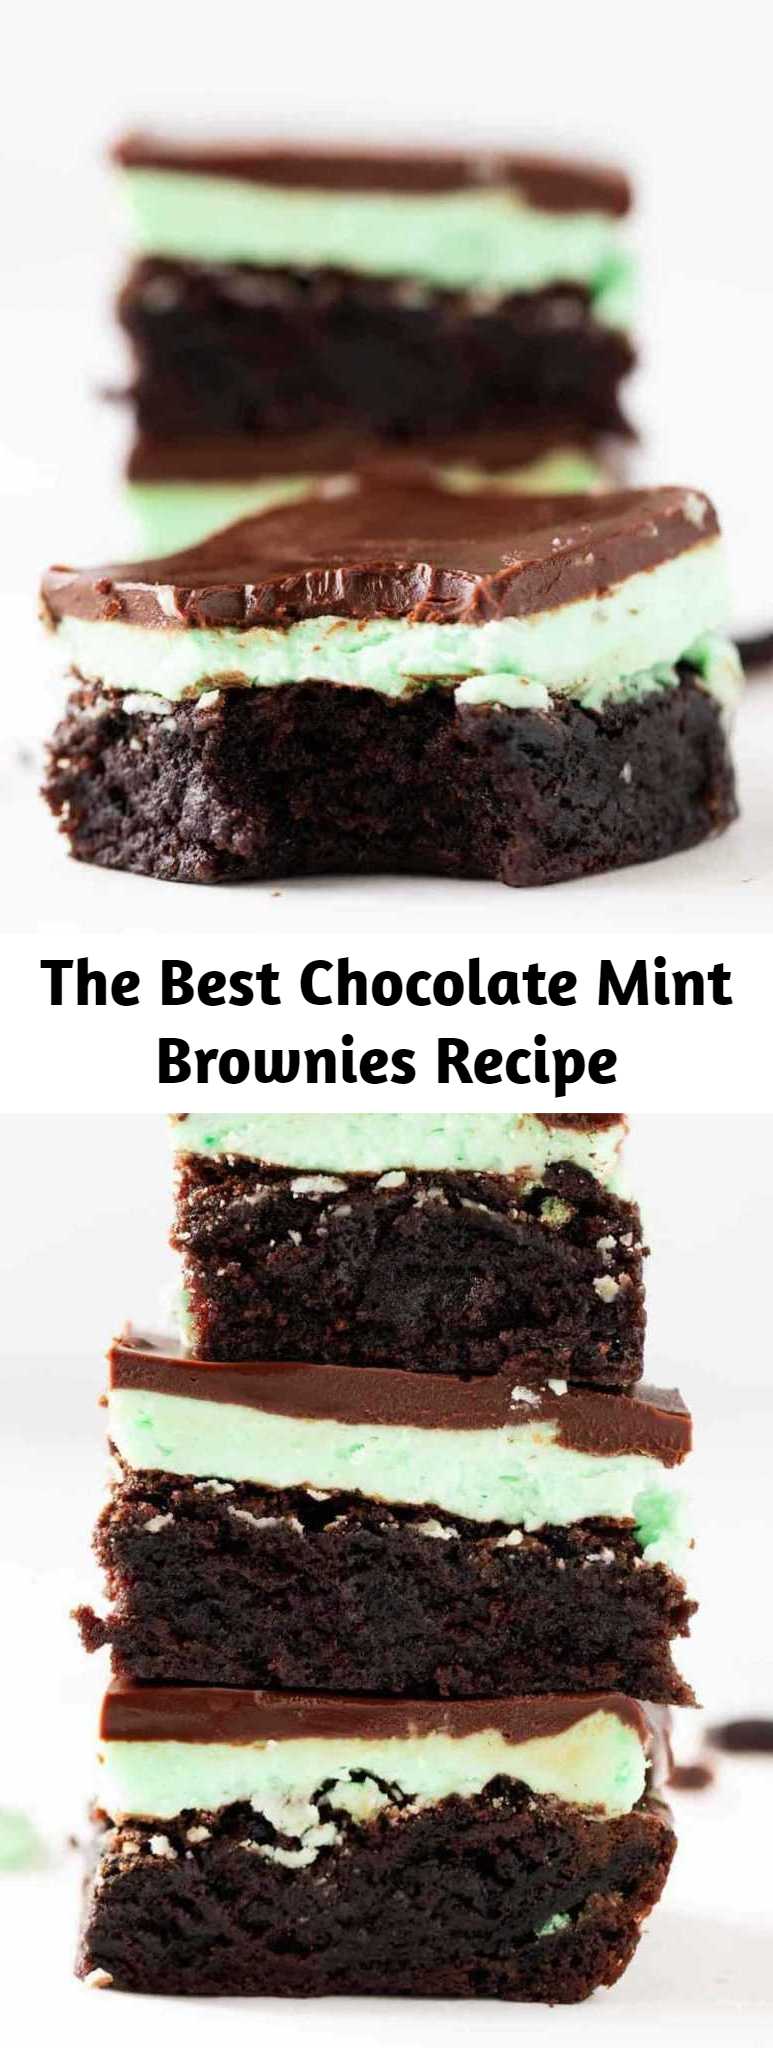 The Best Chocolate Mint Brownies Recipe - Fudgy mint brownies topped with a mint buttercream frosting and chocolate ganache. The most incredible dessert that's perfect for chocolate lovers!